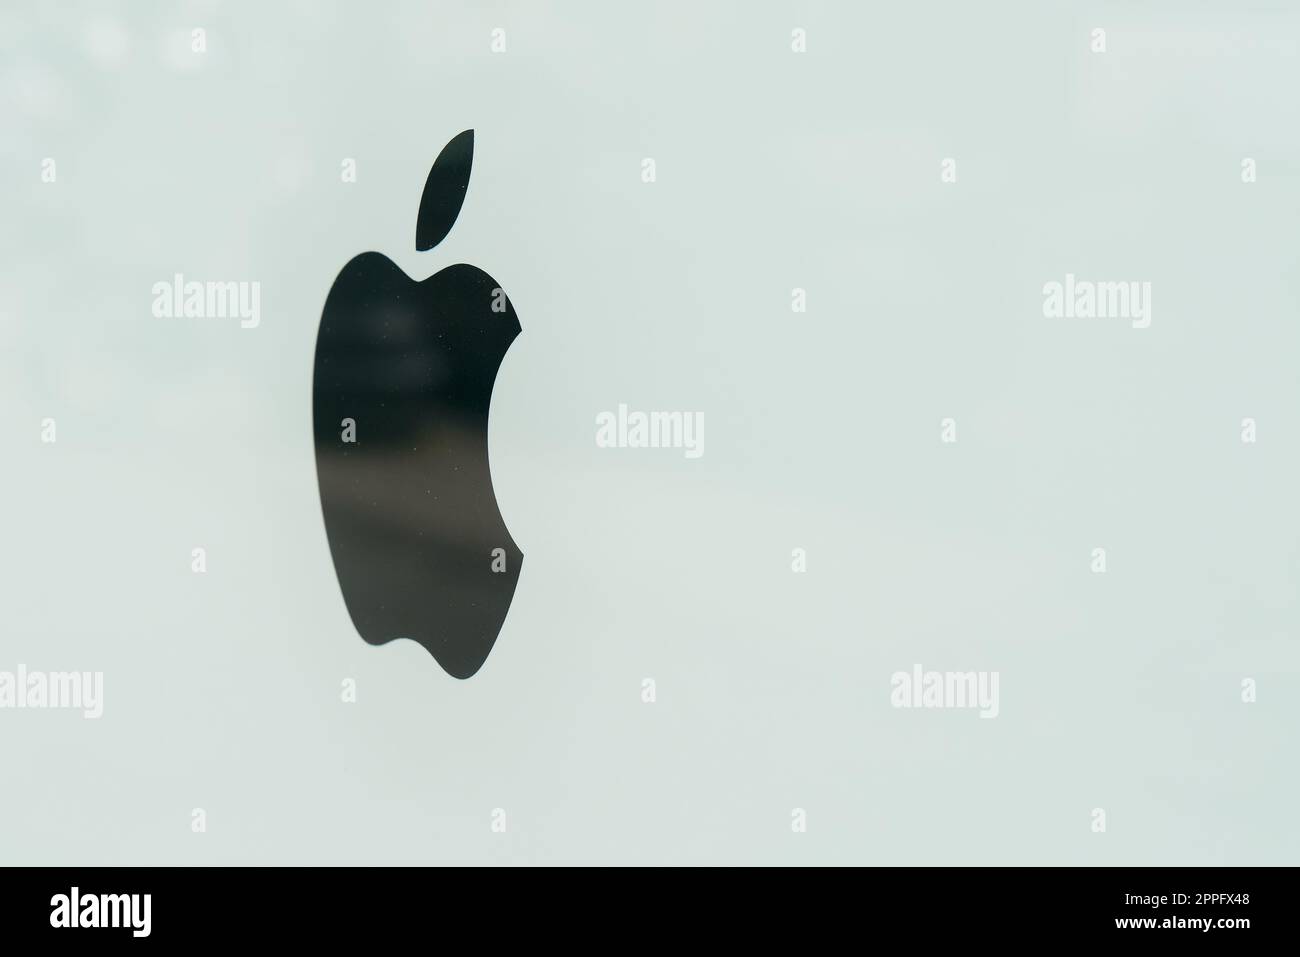 Logo of Apple company on a dirty shop window in downtown Berlin Stock Photo